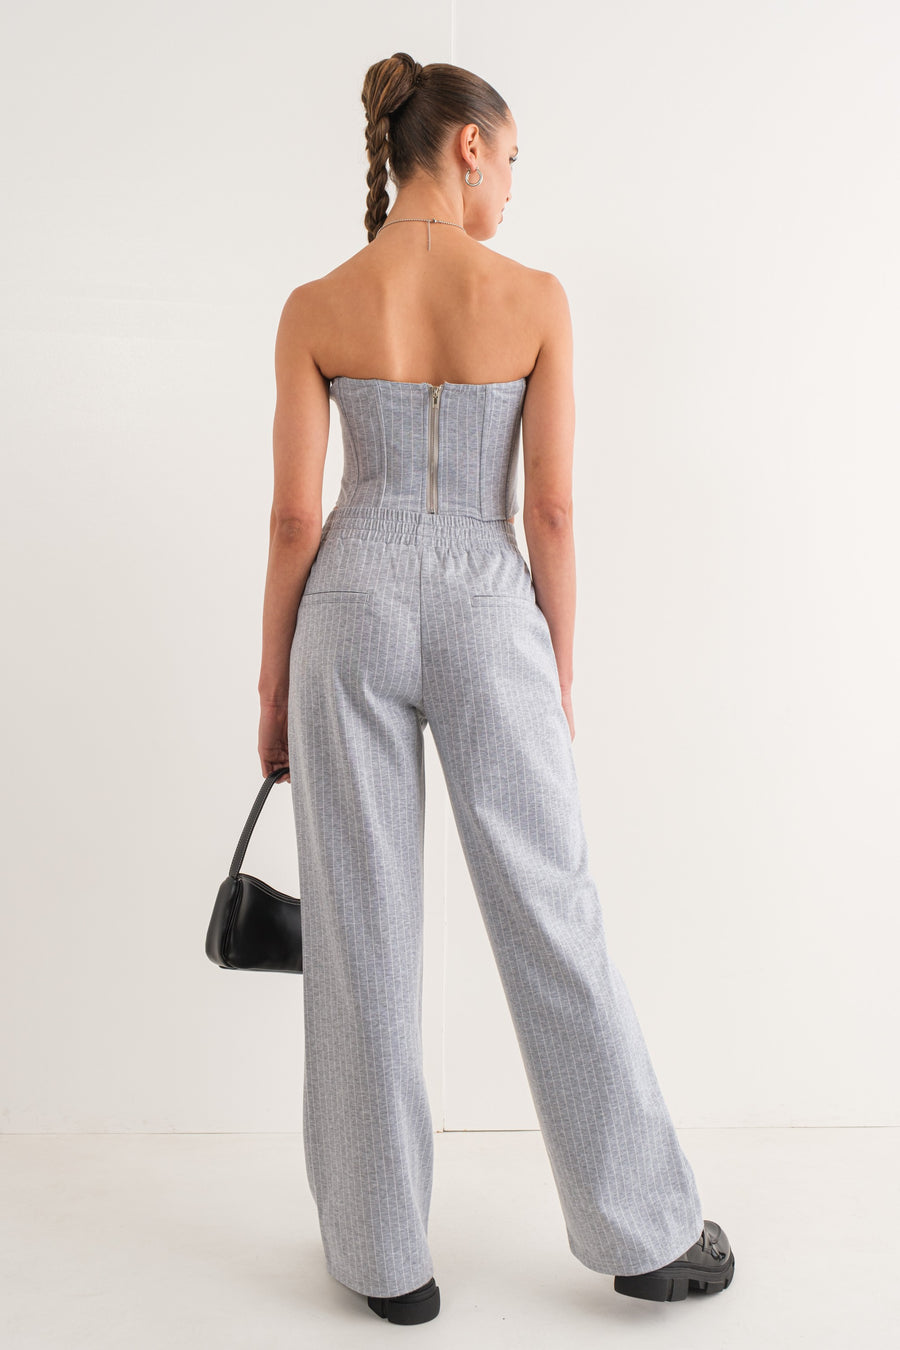 Heather Grey tube top with boning and zipper in the back.